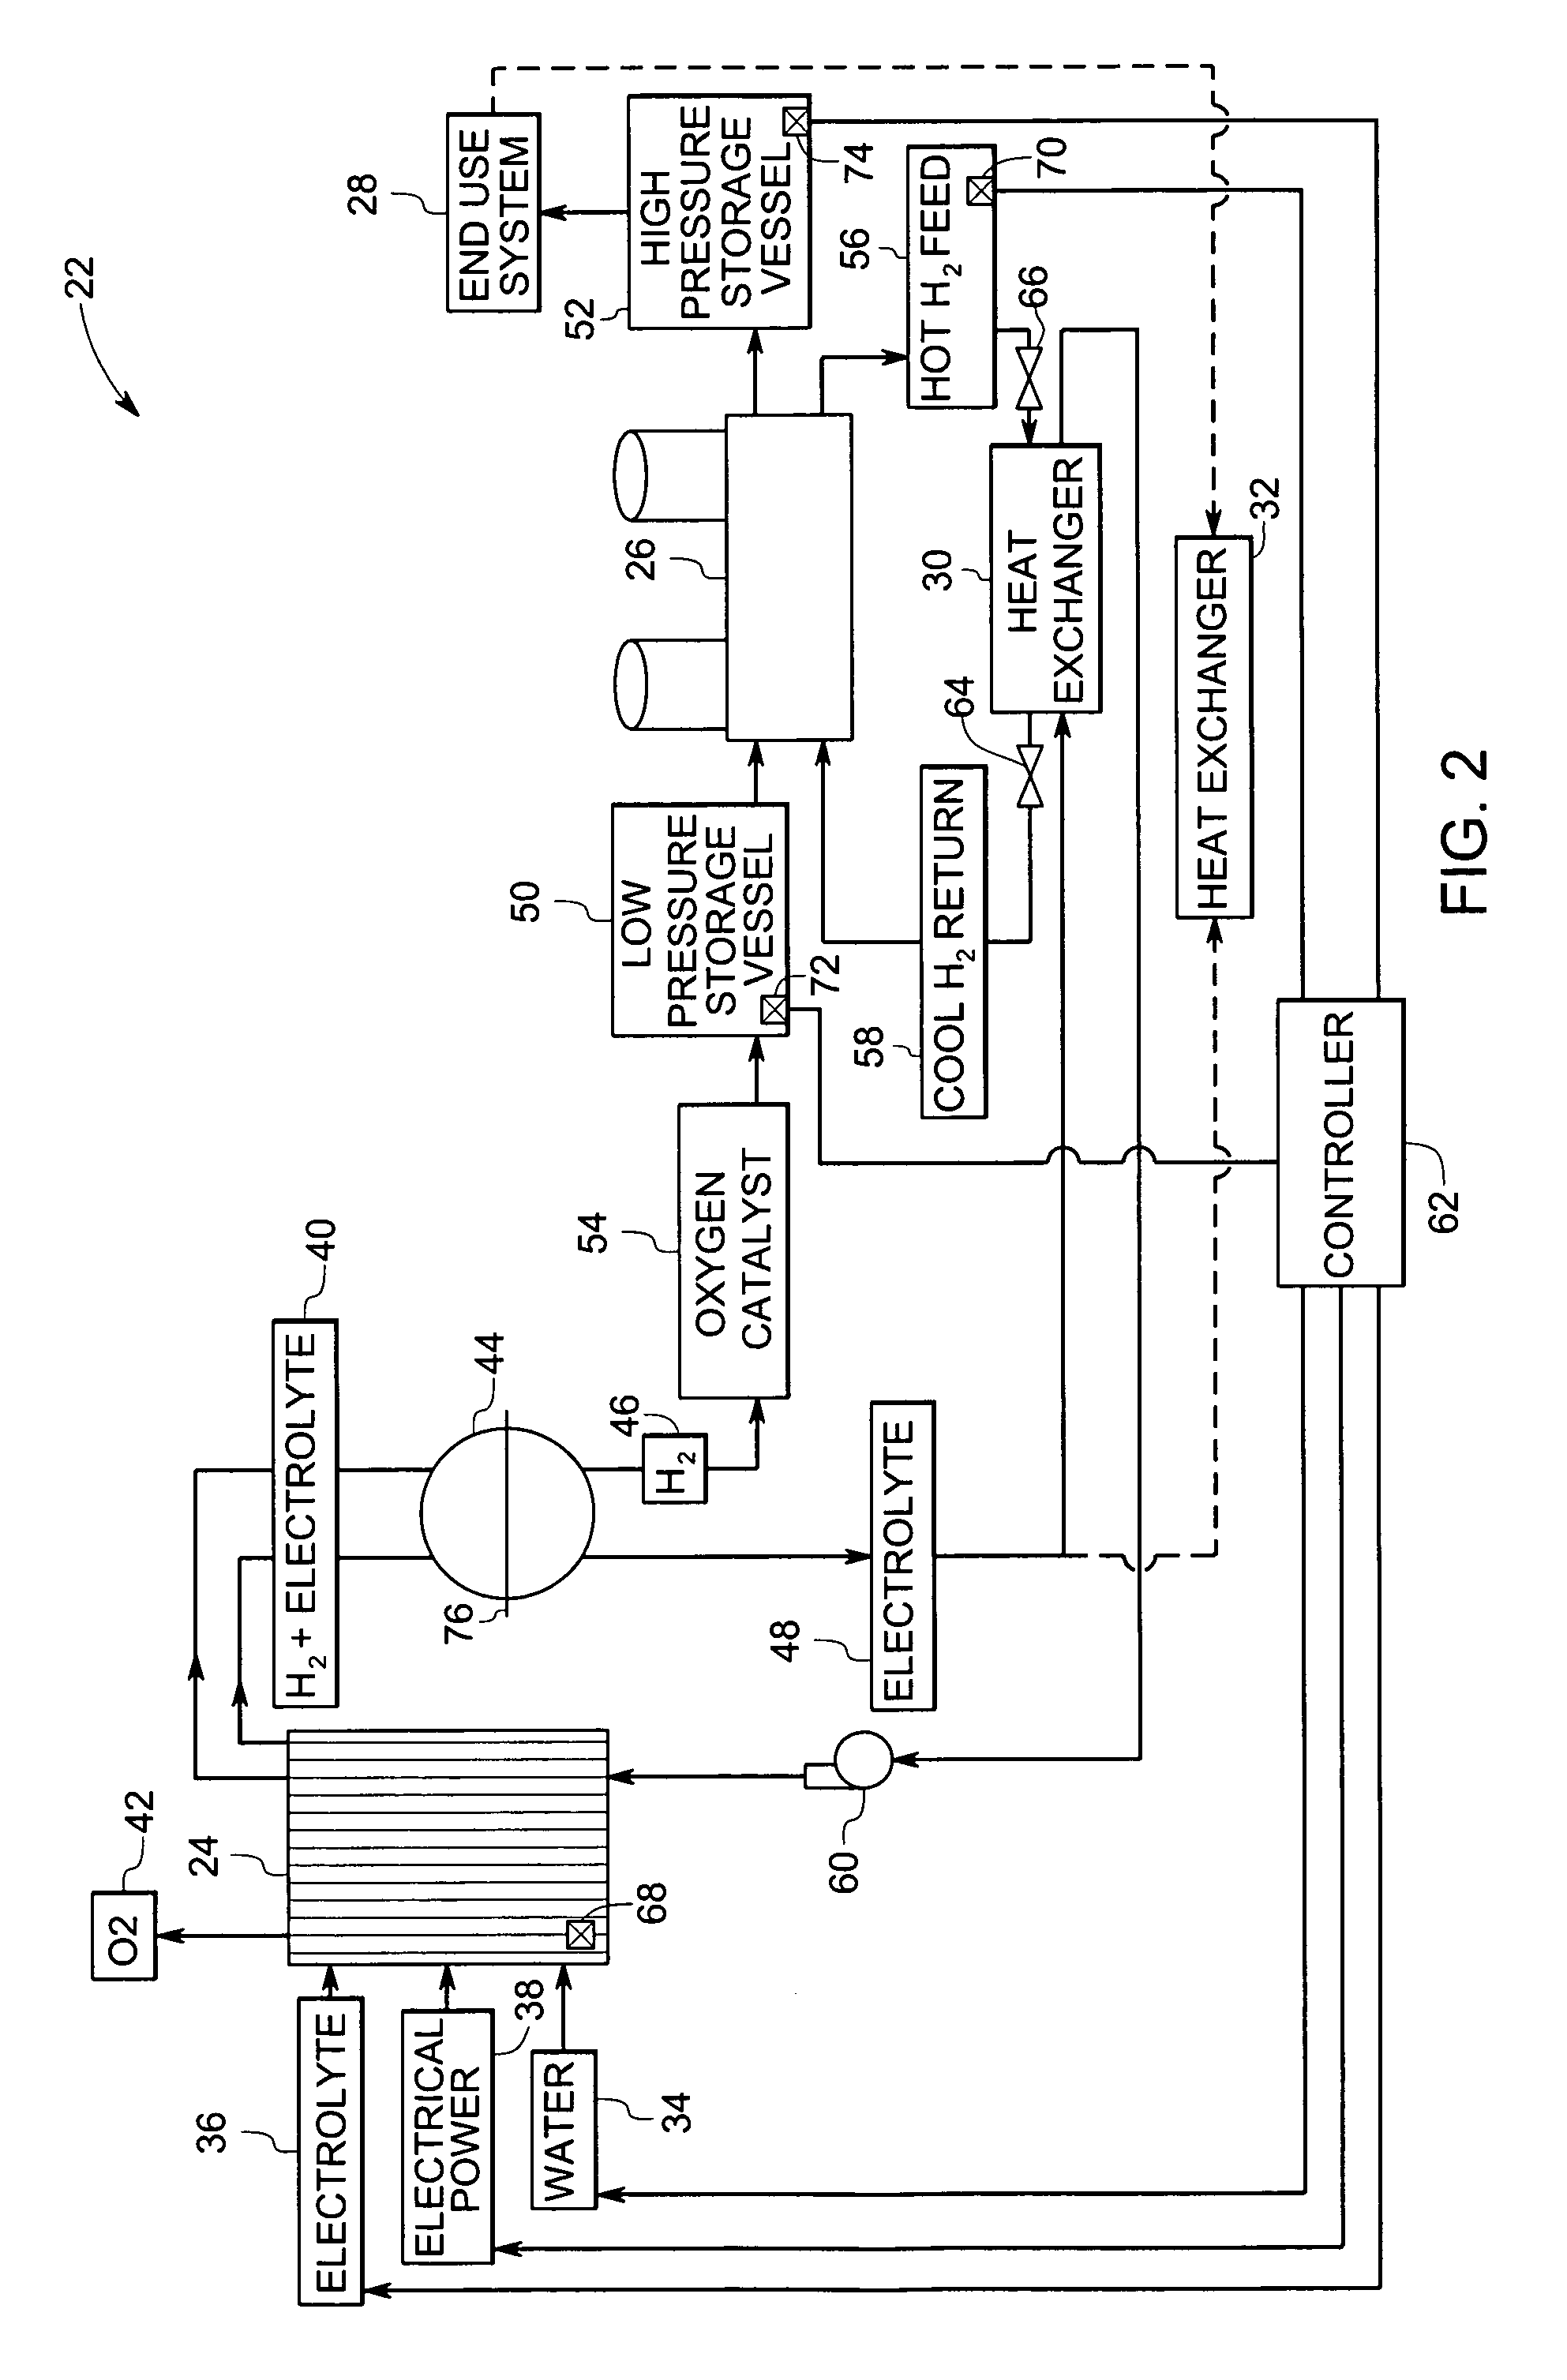 Integrated hydrogen production and processing system and method of operation